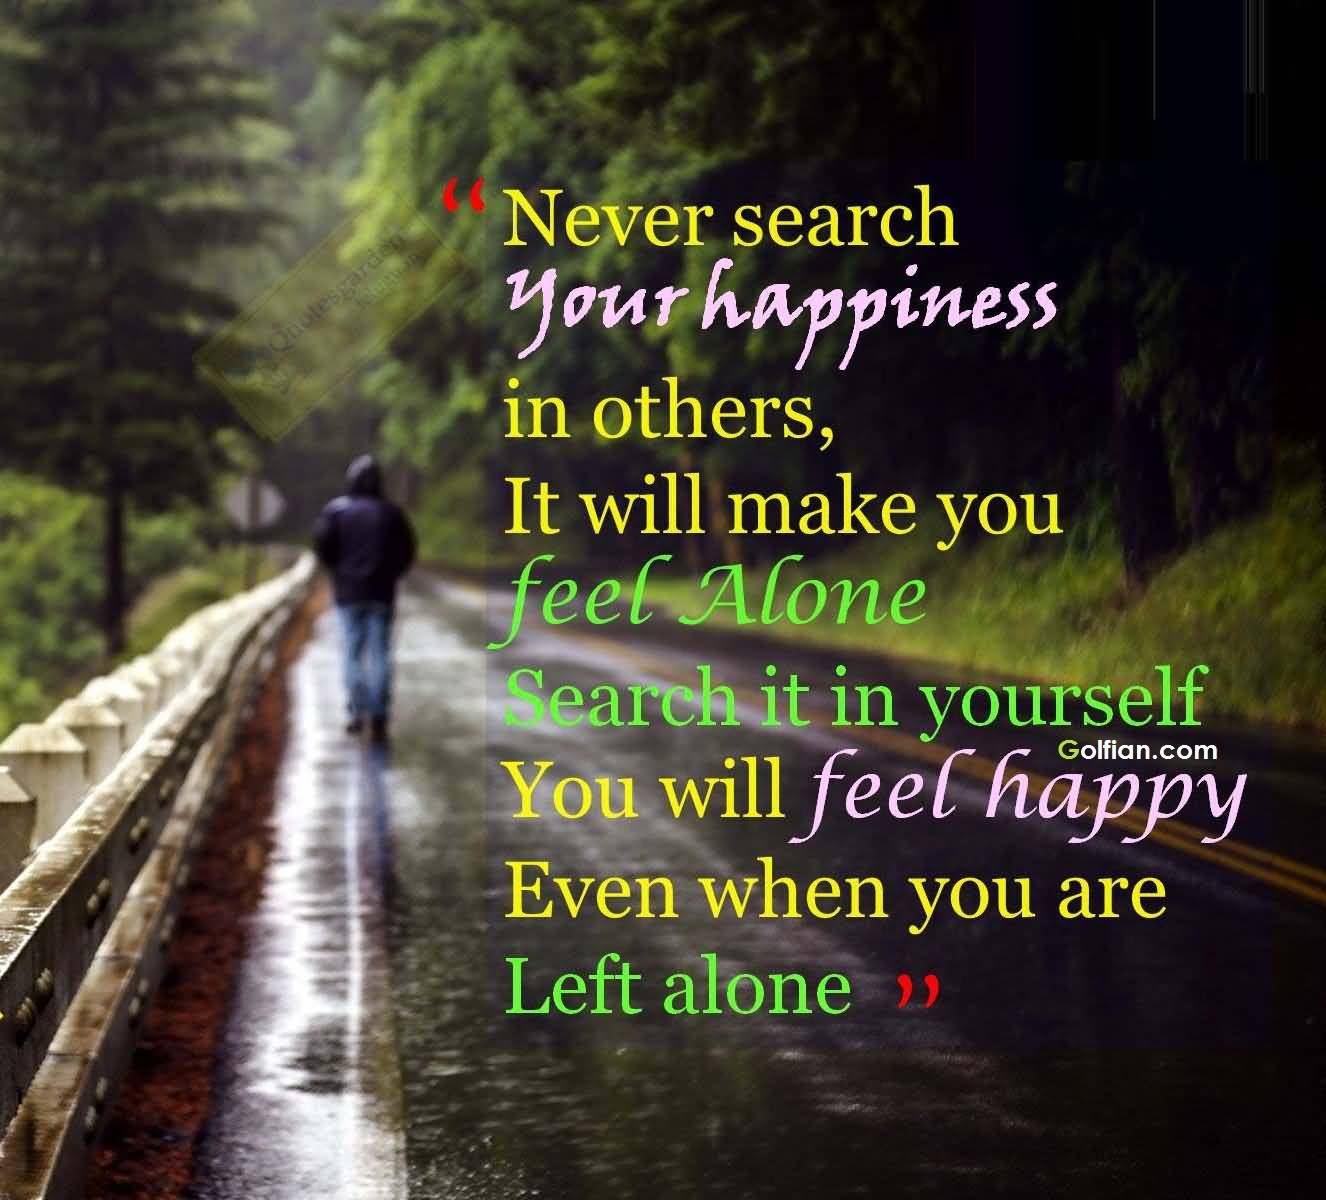 Never search your Happiness in others which will make you feel alone, but search it in yourself, you will feel Happy even if you are left alone